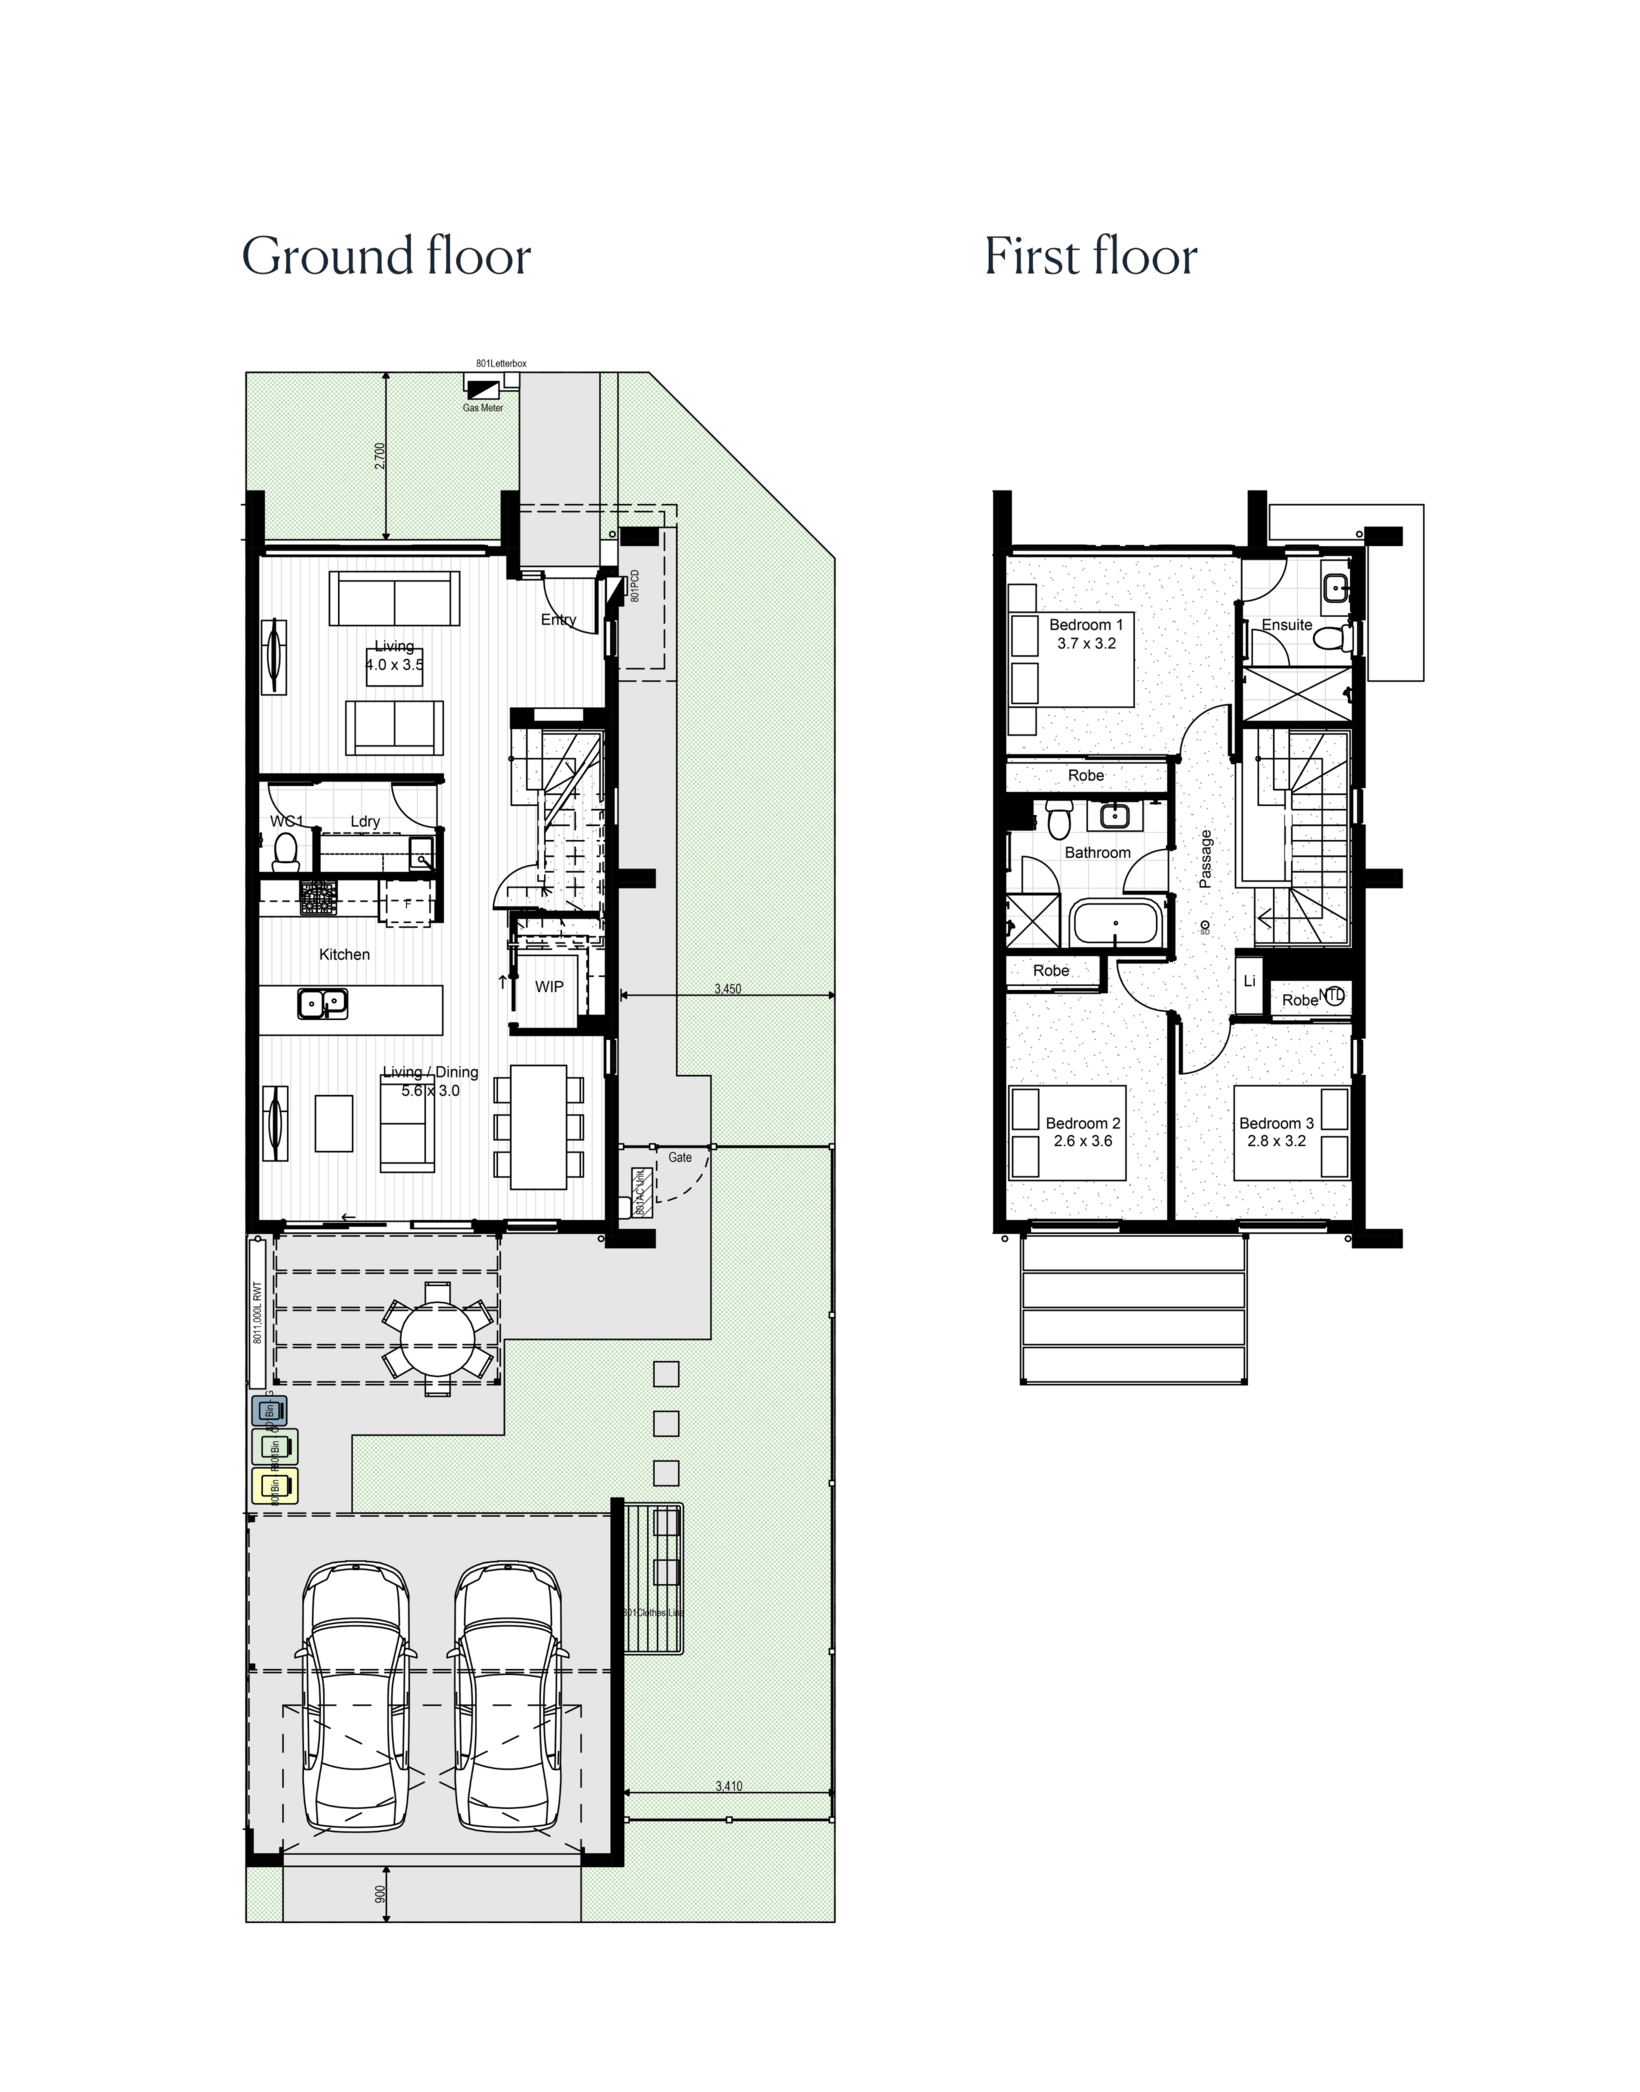 The floorplan for the Option 1 townhome at Riverlea.